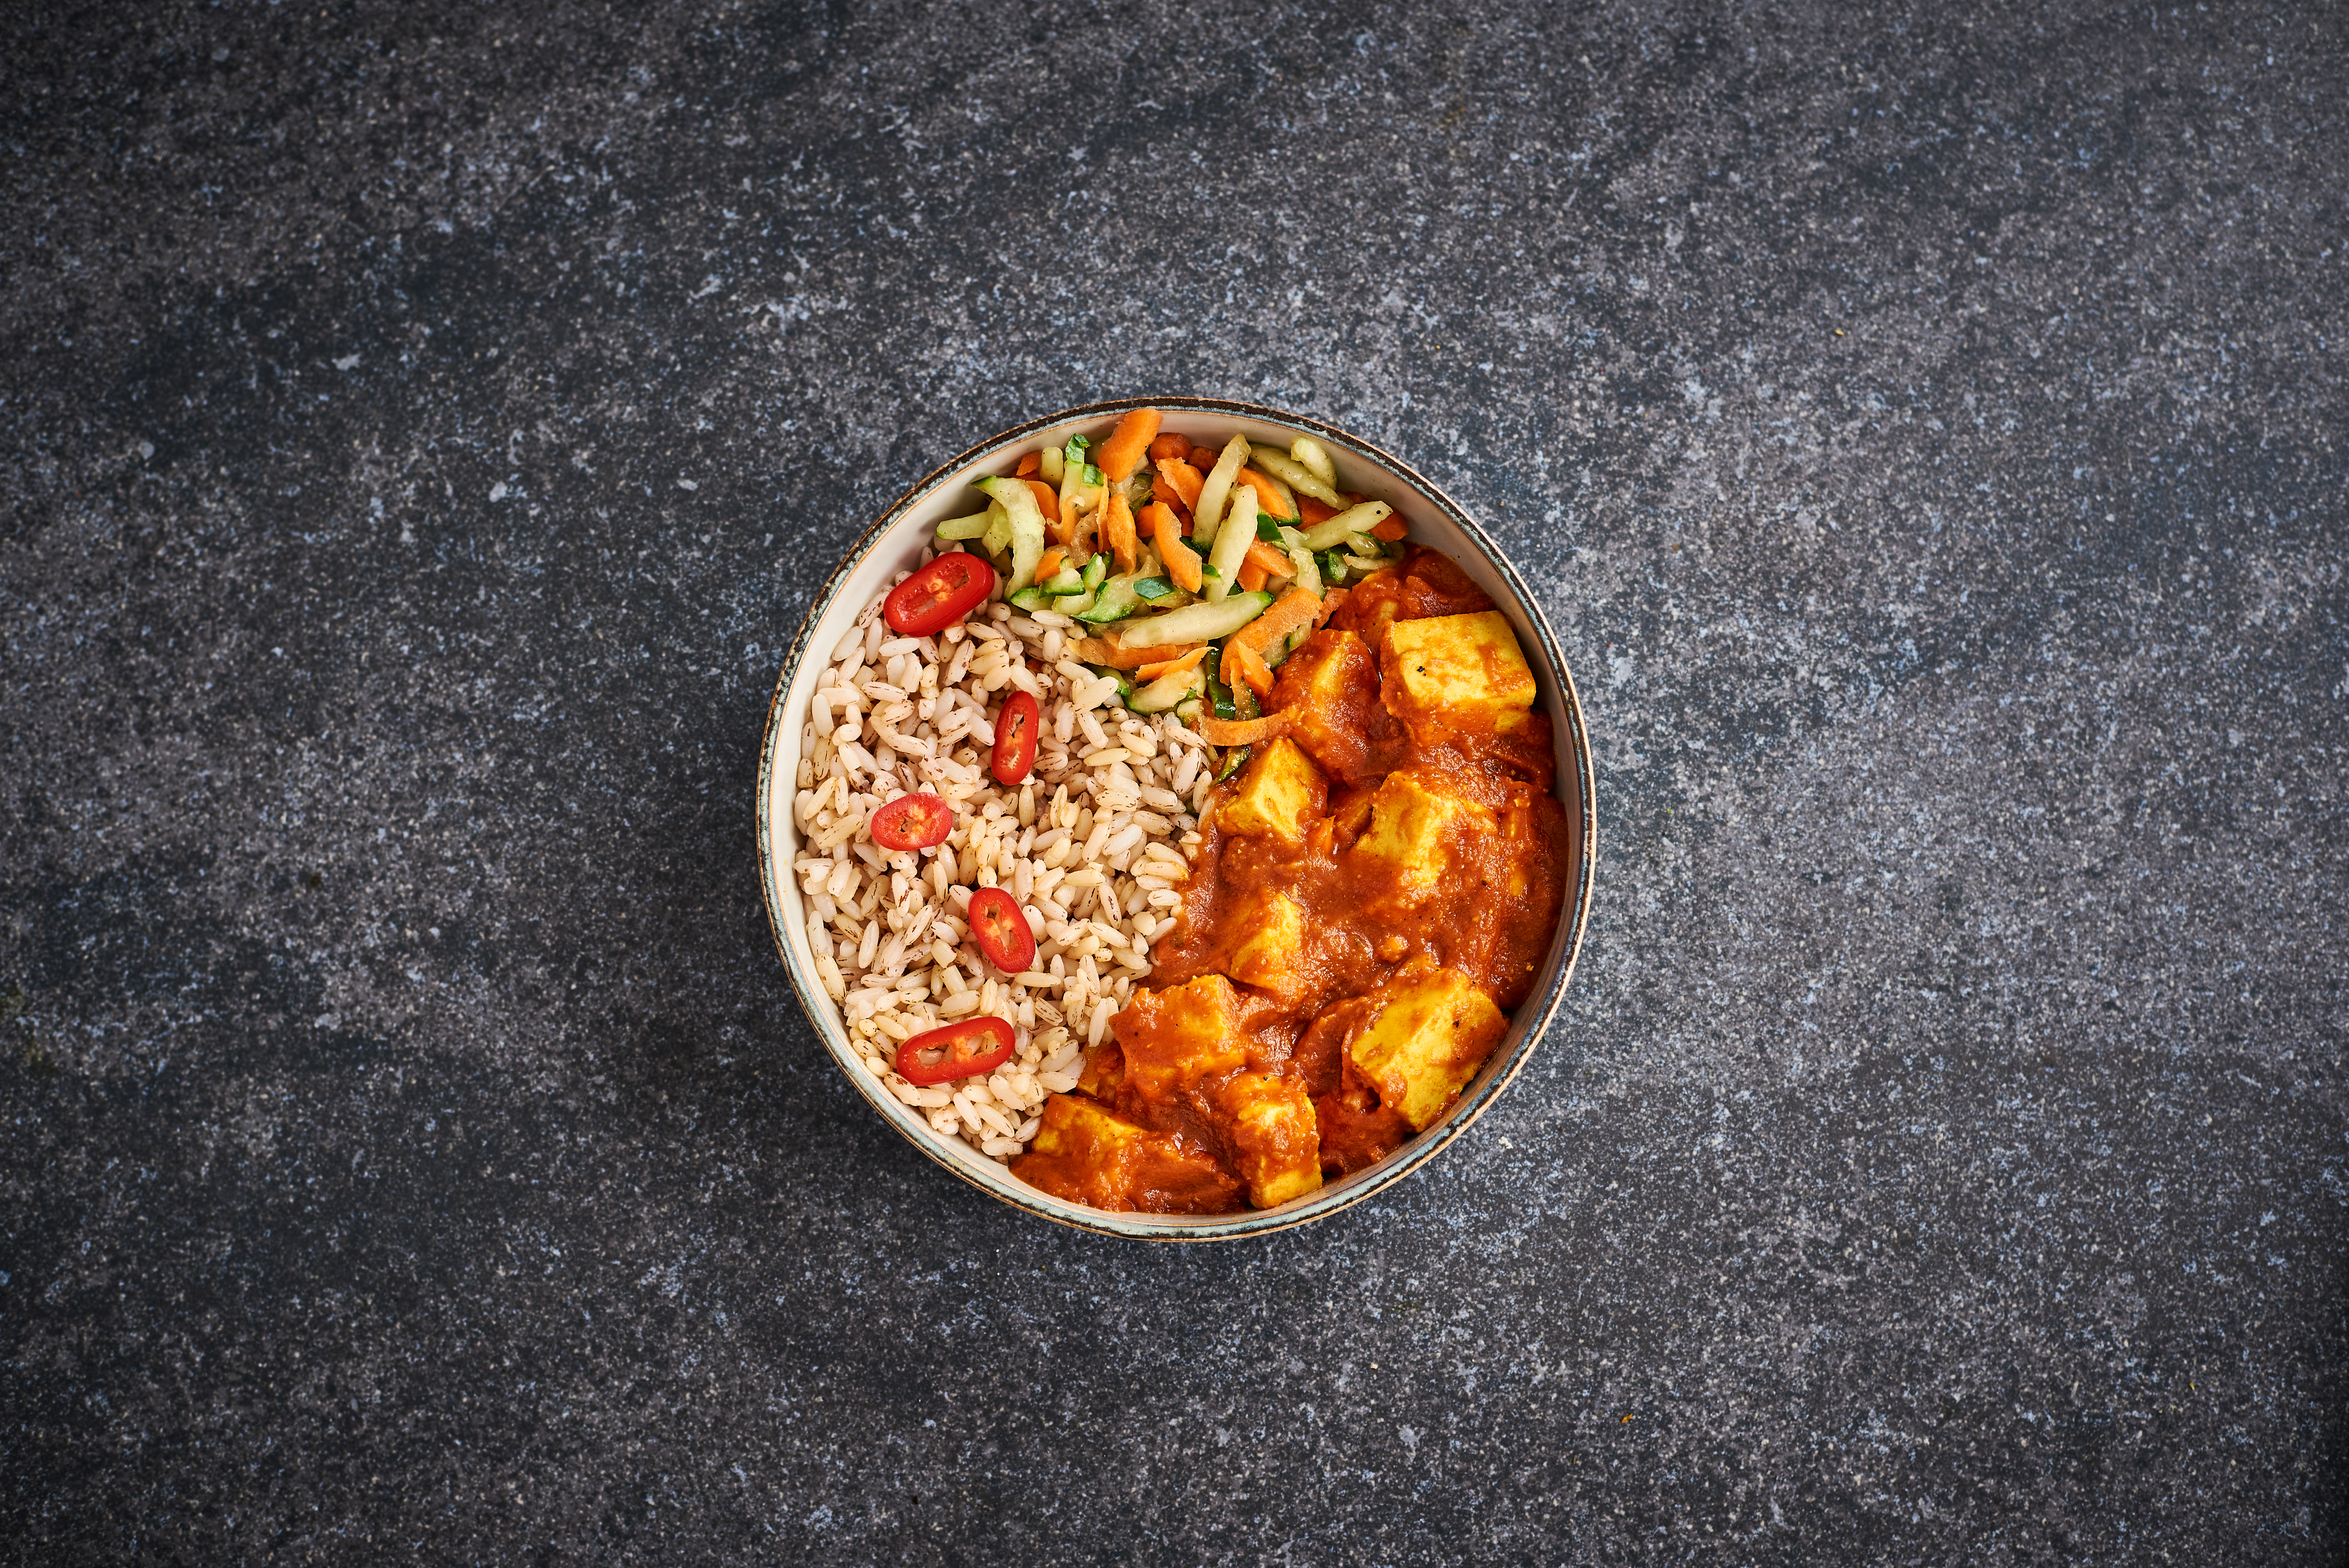 Atcha: India-Inspired 'Build Your Own Bowl' Pop-up